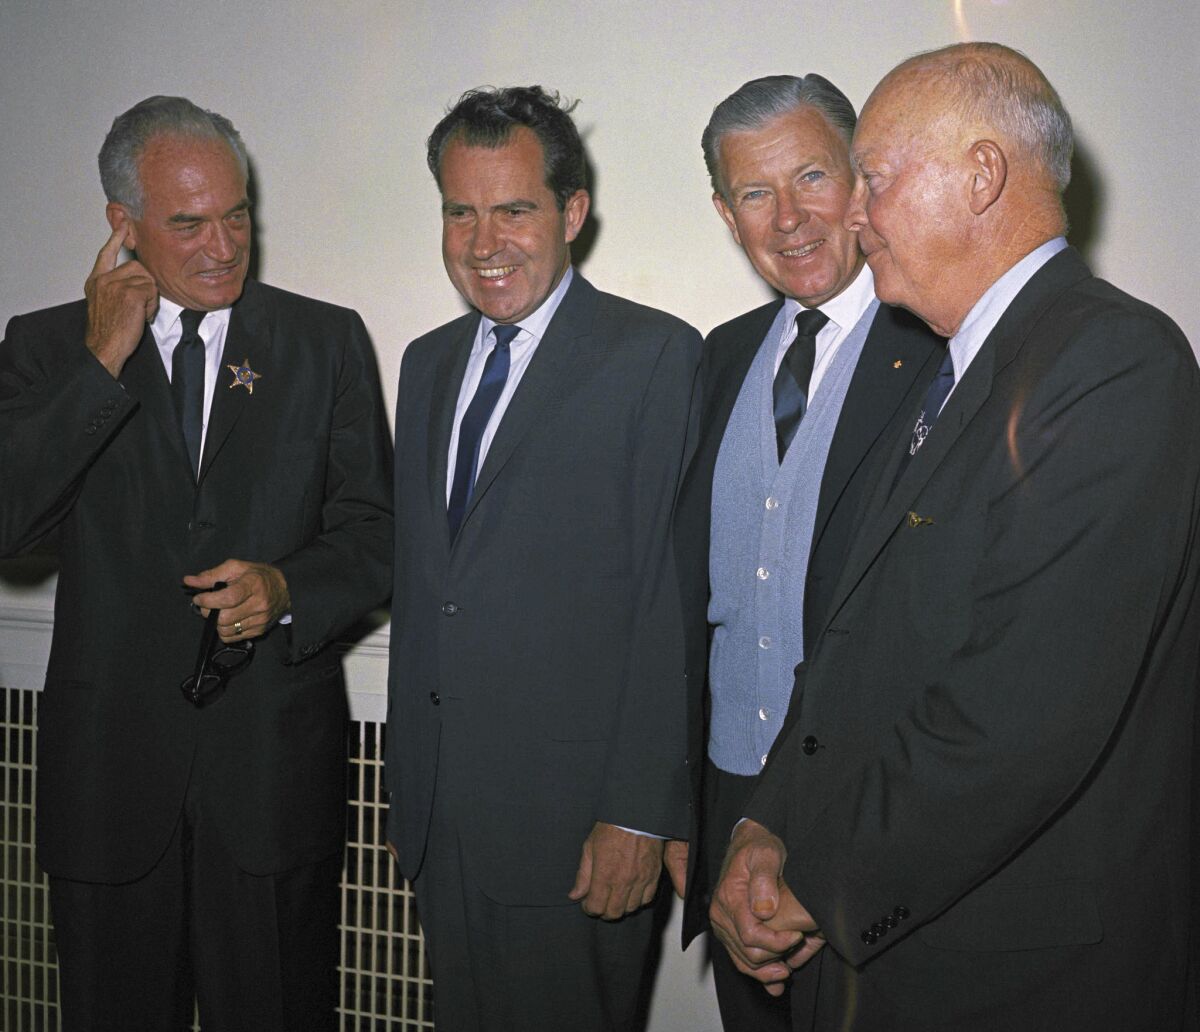 Left to Right: Sen. Barry Goldwater; President Richard Nixon, vice president; George Murphy and Dwight D. Eisenhower, former president at a luncheon at the Mark Hopkins Hotel in San Francisco on July 14, 1964.